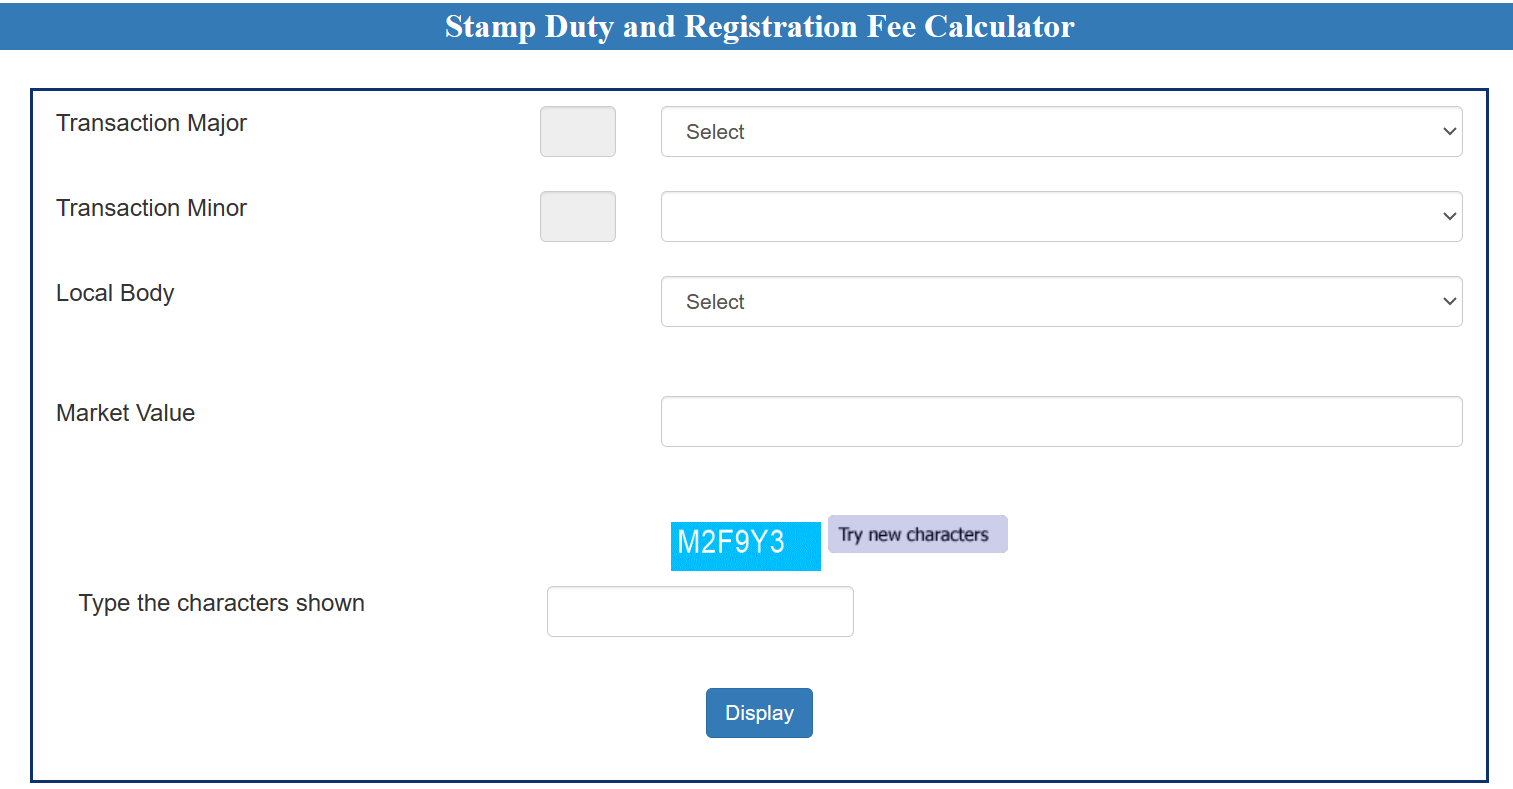 Stamp Duty and Registration Fee